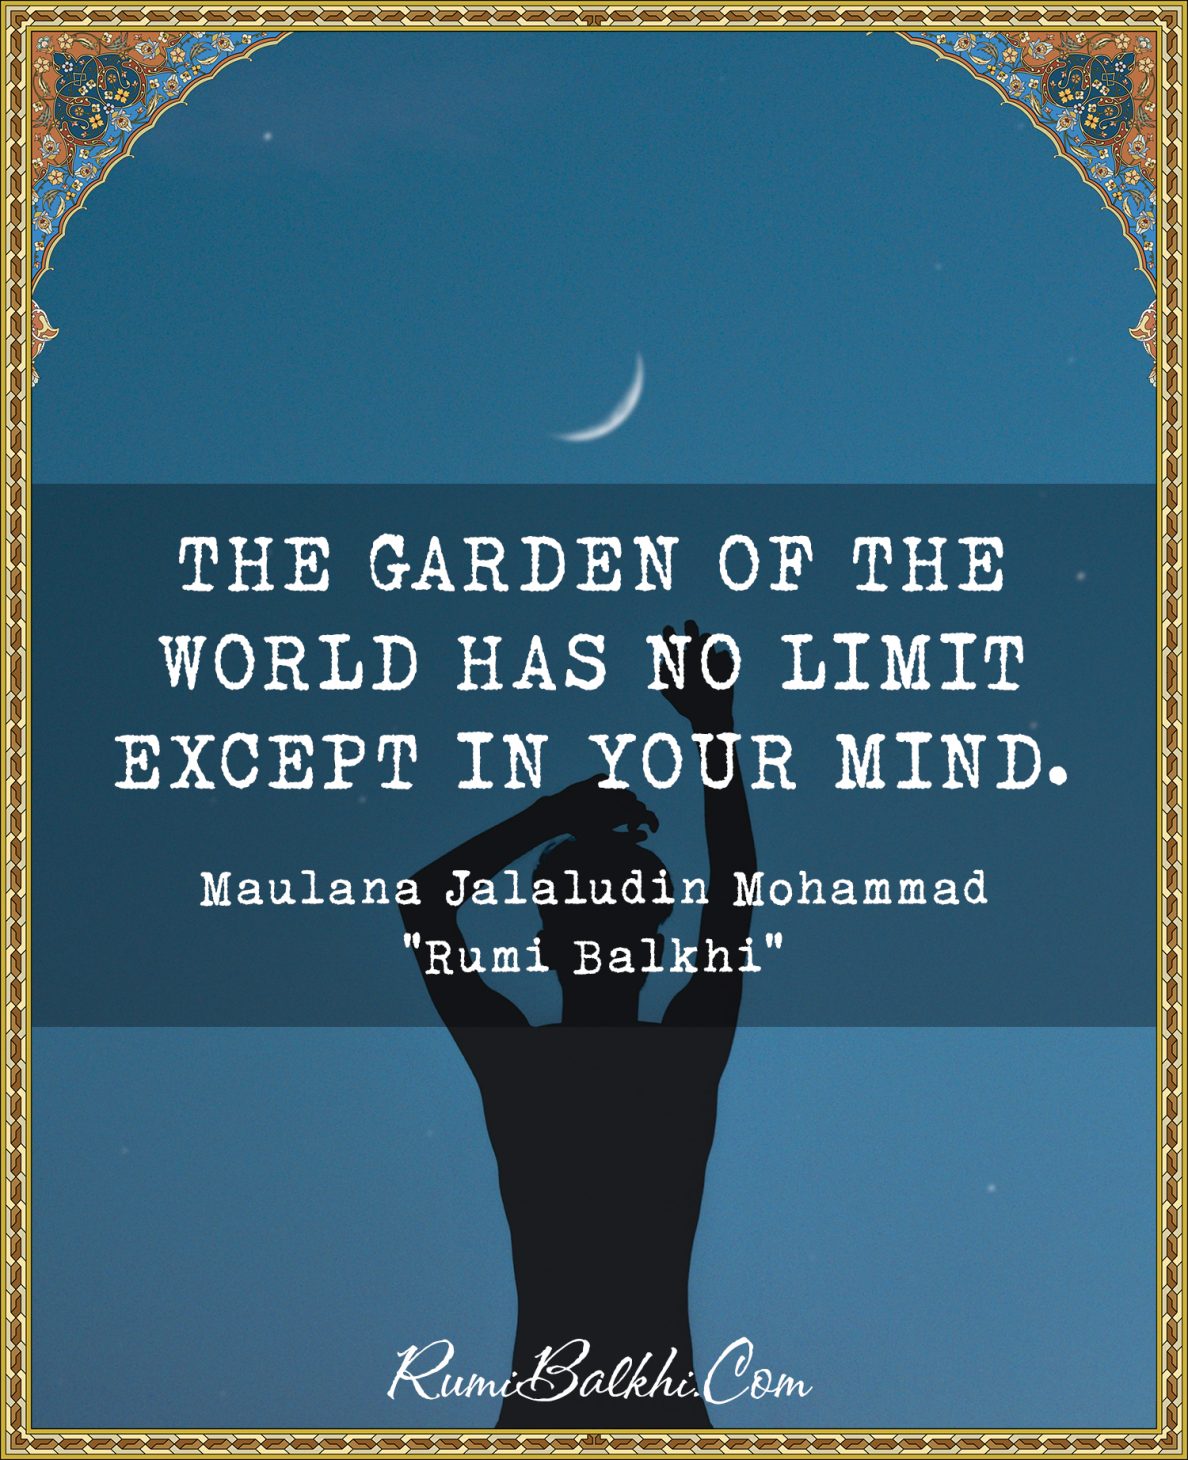 The garden of the world has no limit except in your mind